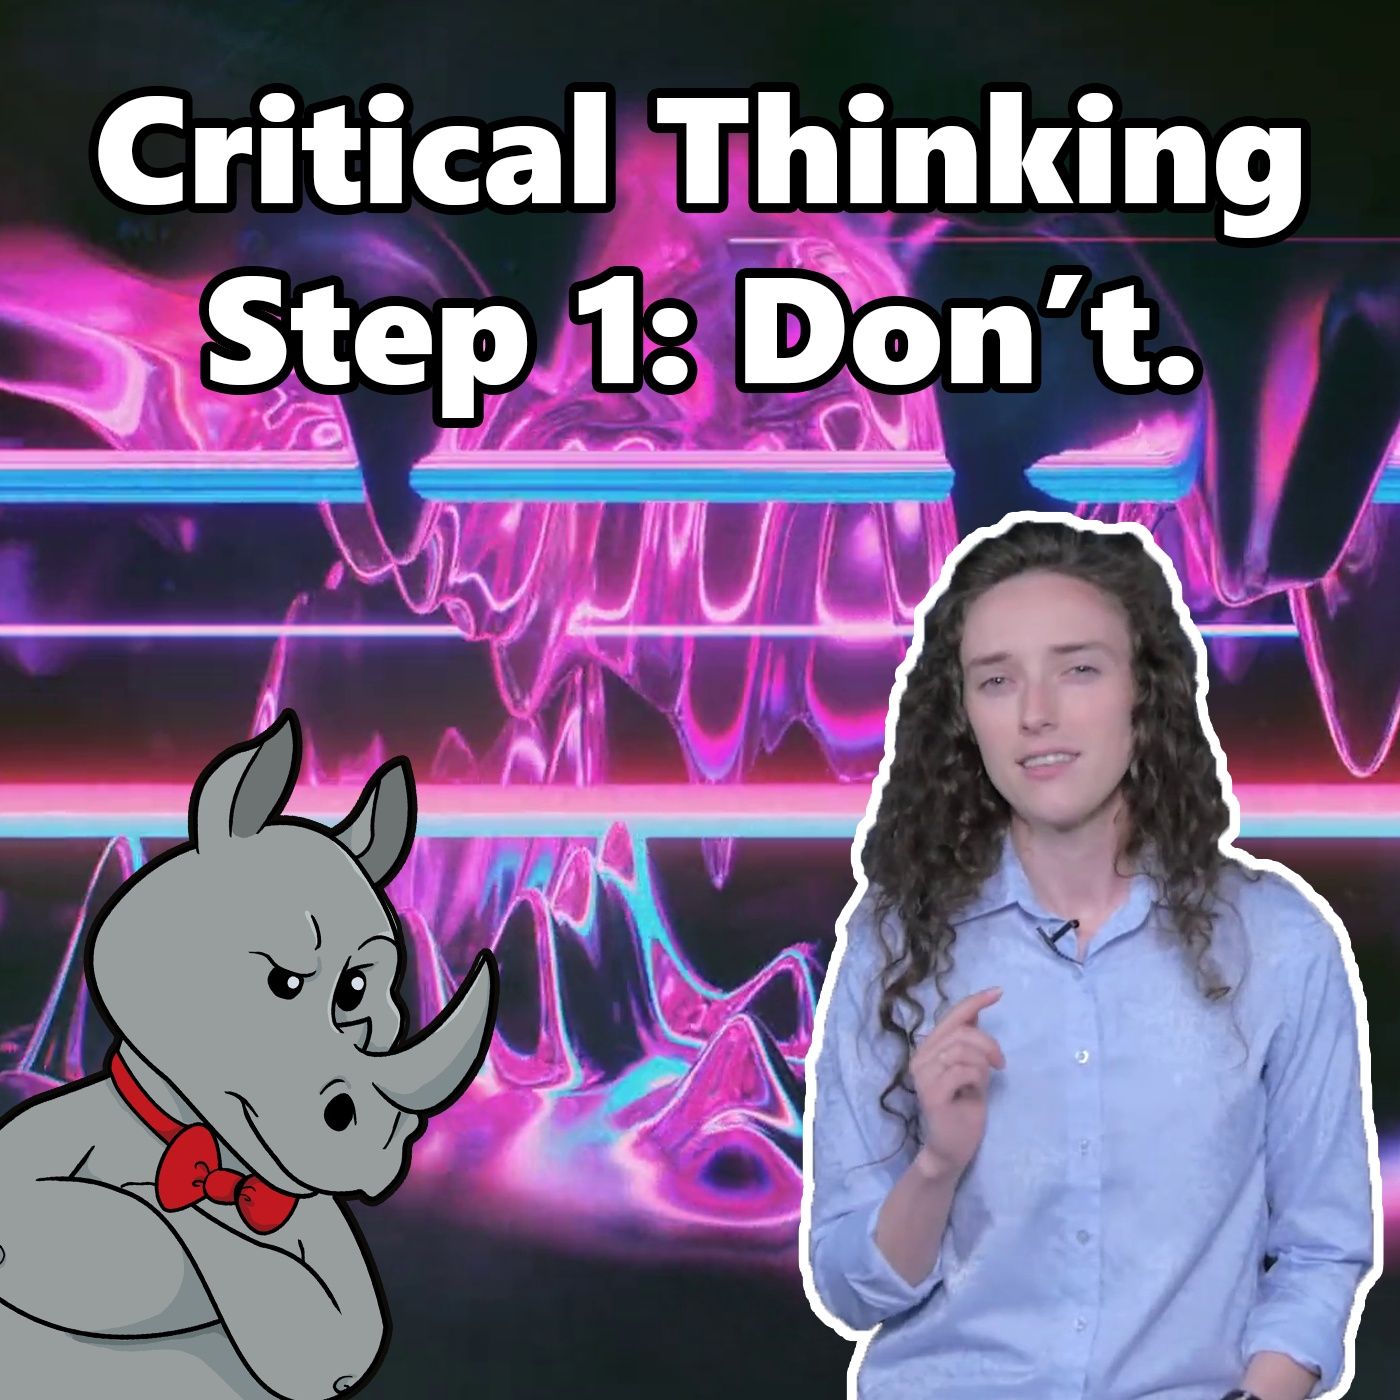 The First Step in Critical Thinking: Don't.